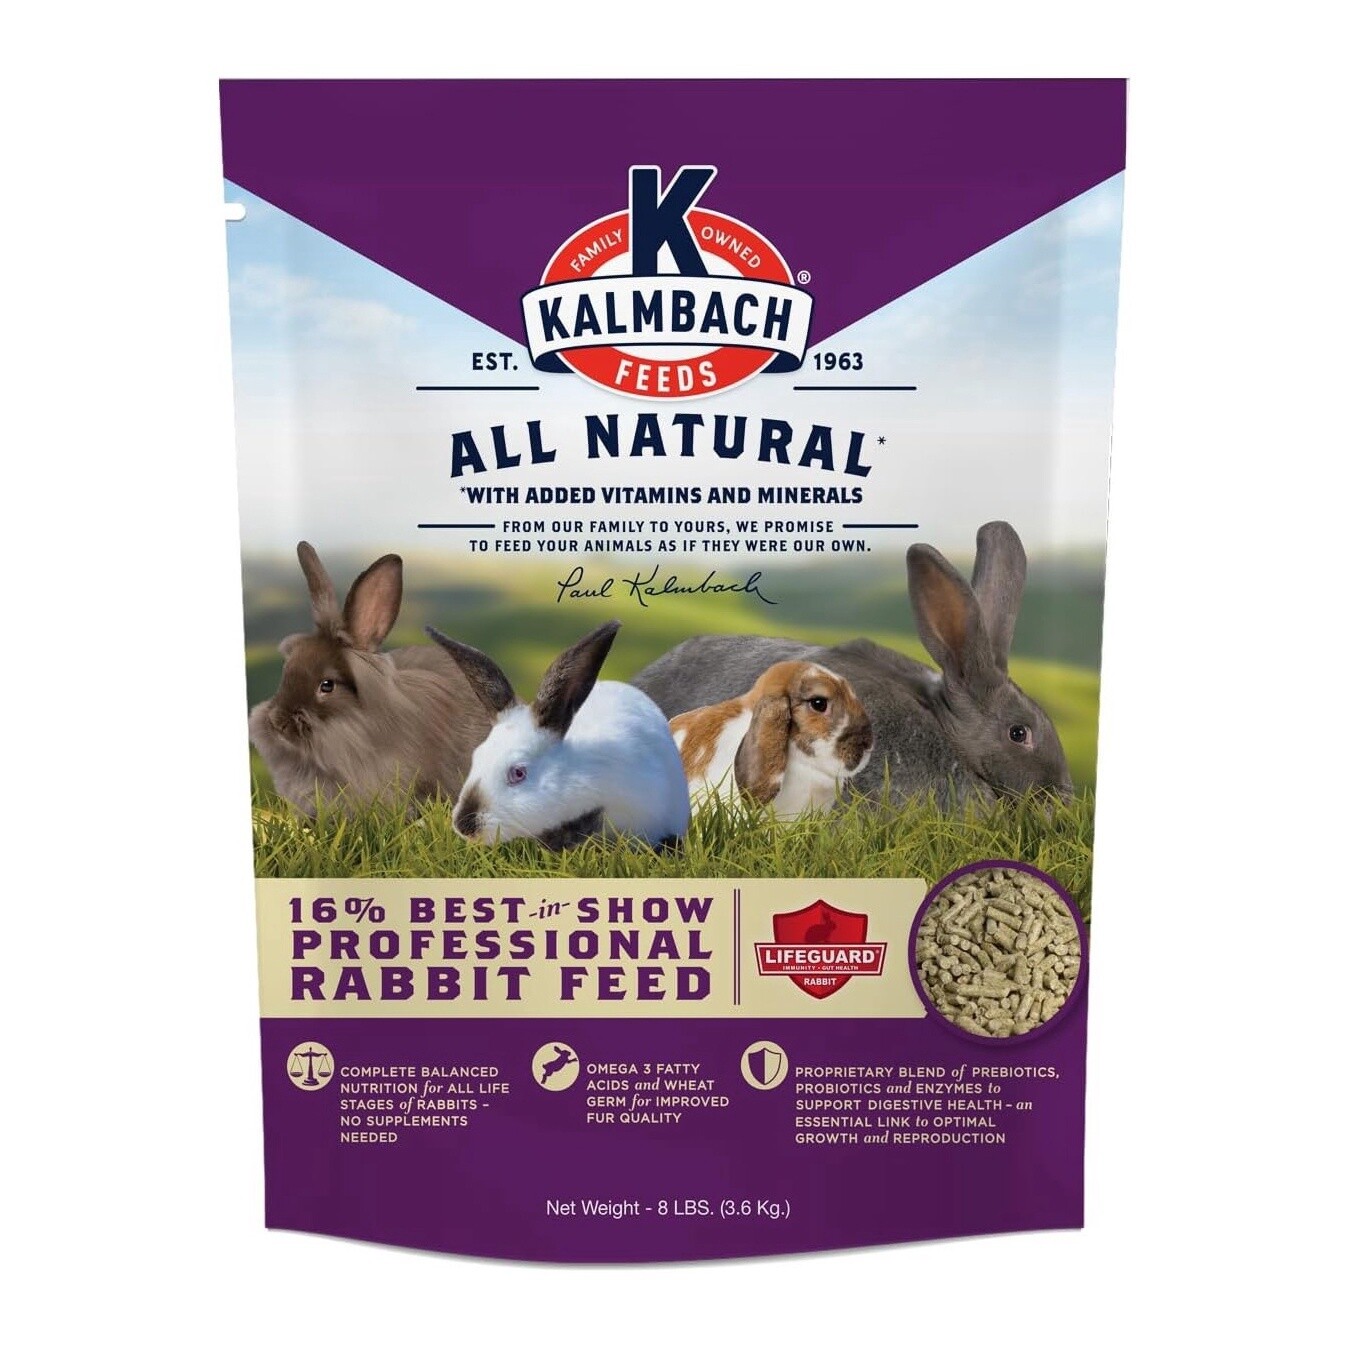 Kalmbach 16% Best-in-Show Rabbit Feed 8 lb